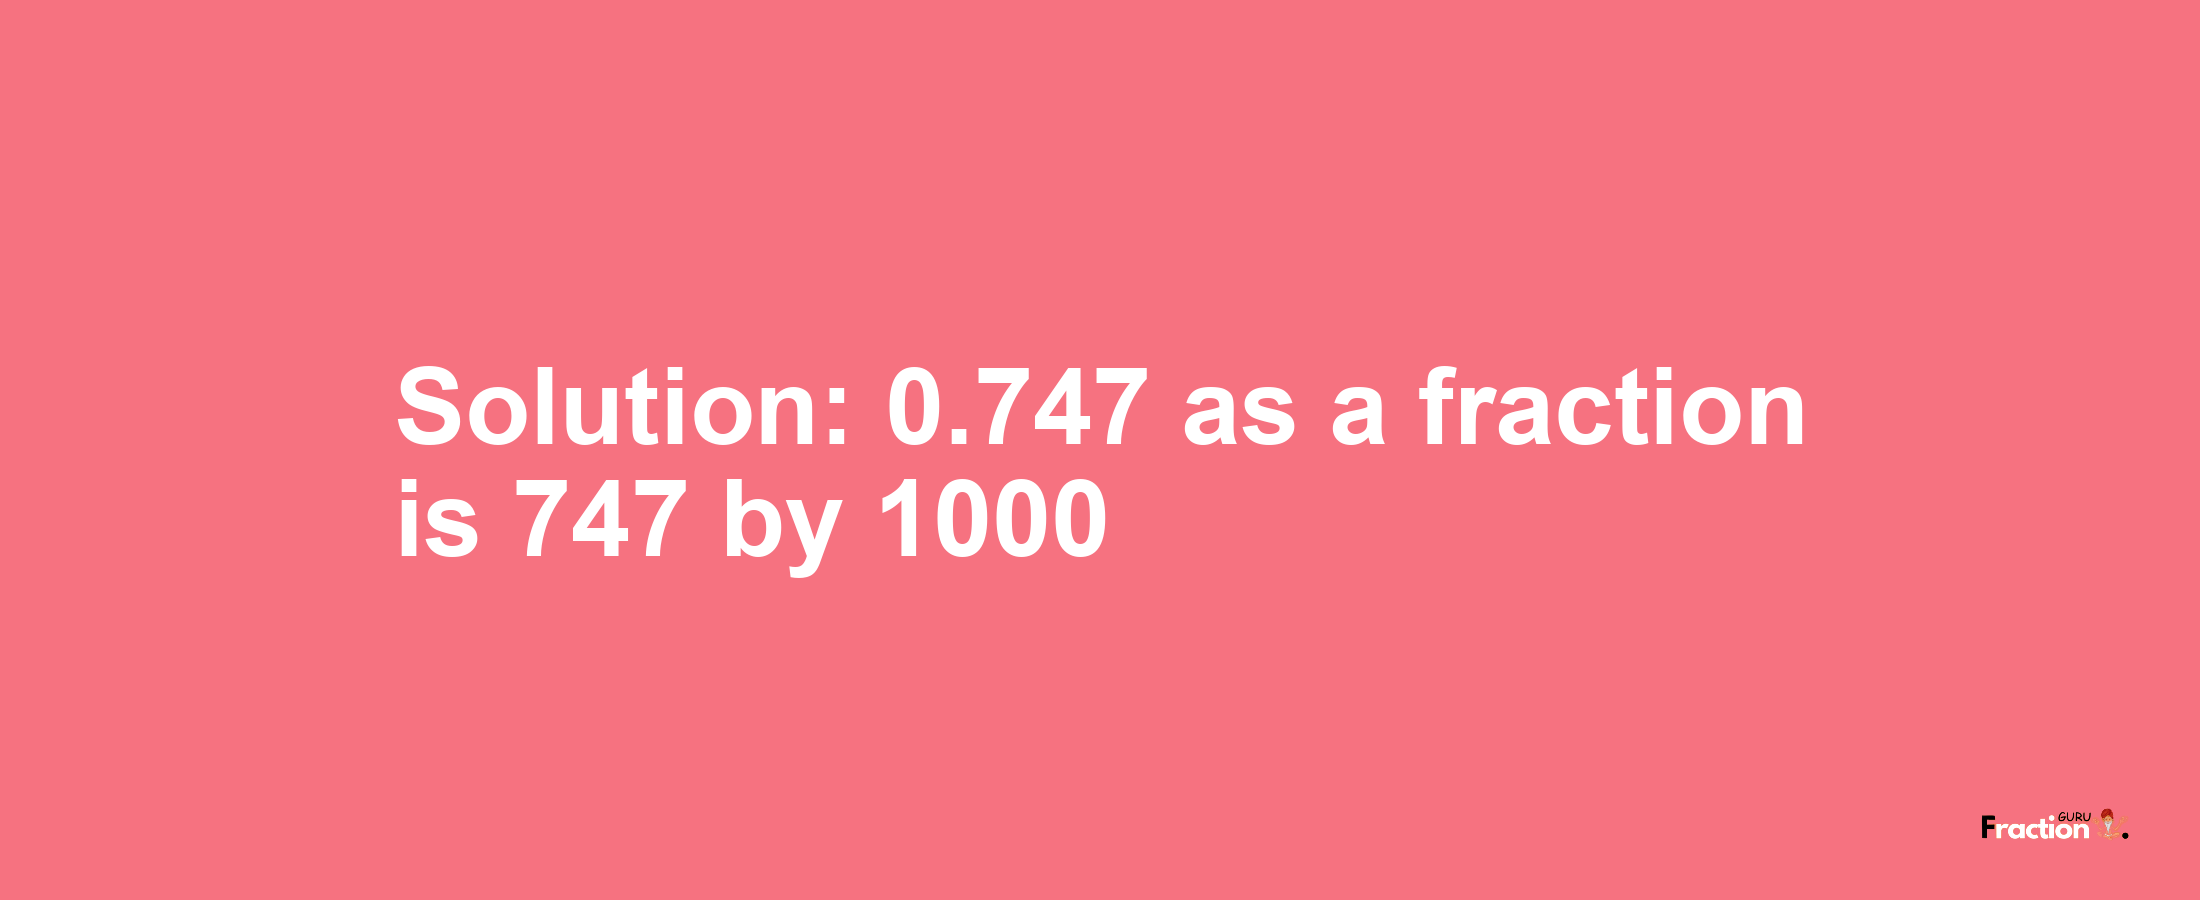 Solution:0.747 as a fraction is 747/1000